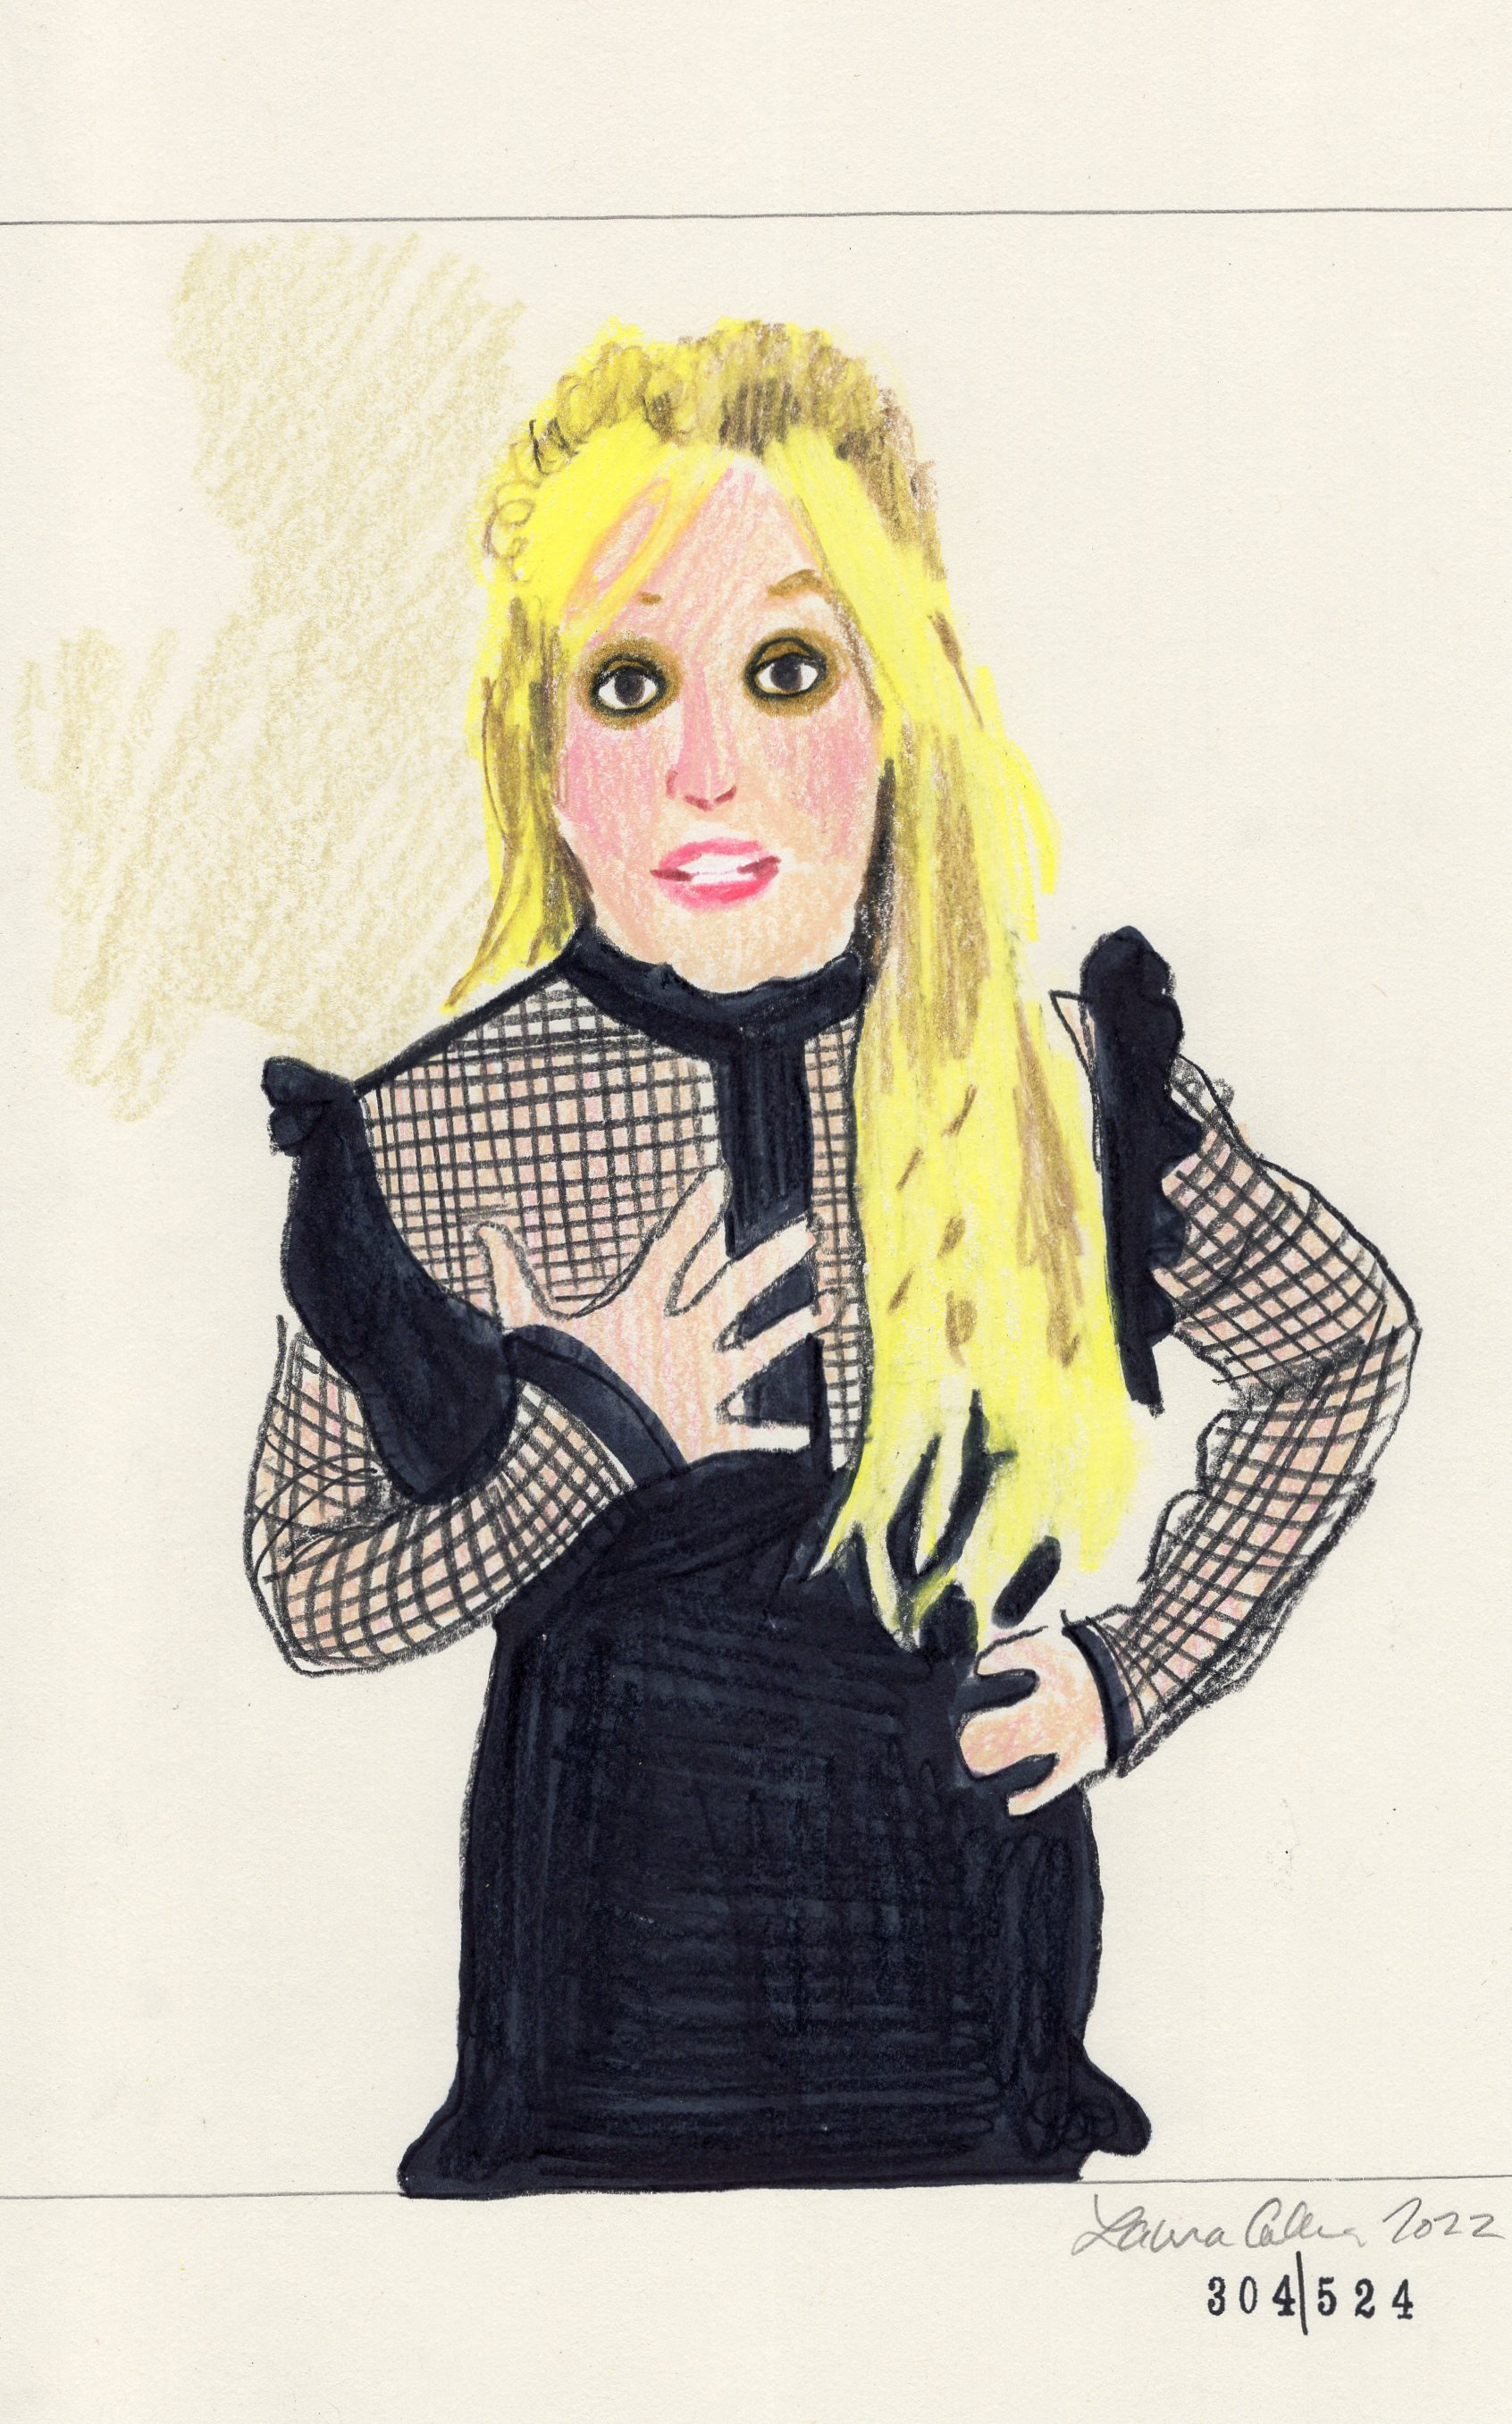 Laura Collins Britney Spears Animation 6x9in mixed media 2022 no304.jpg